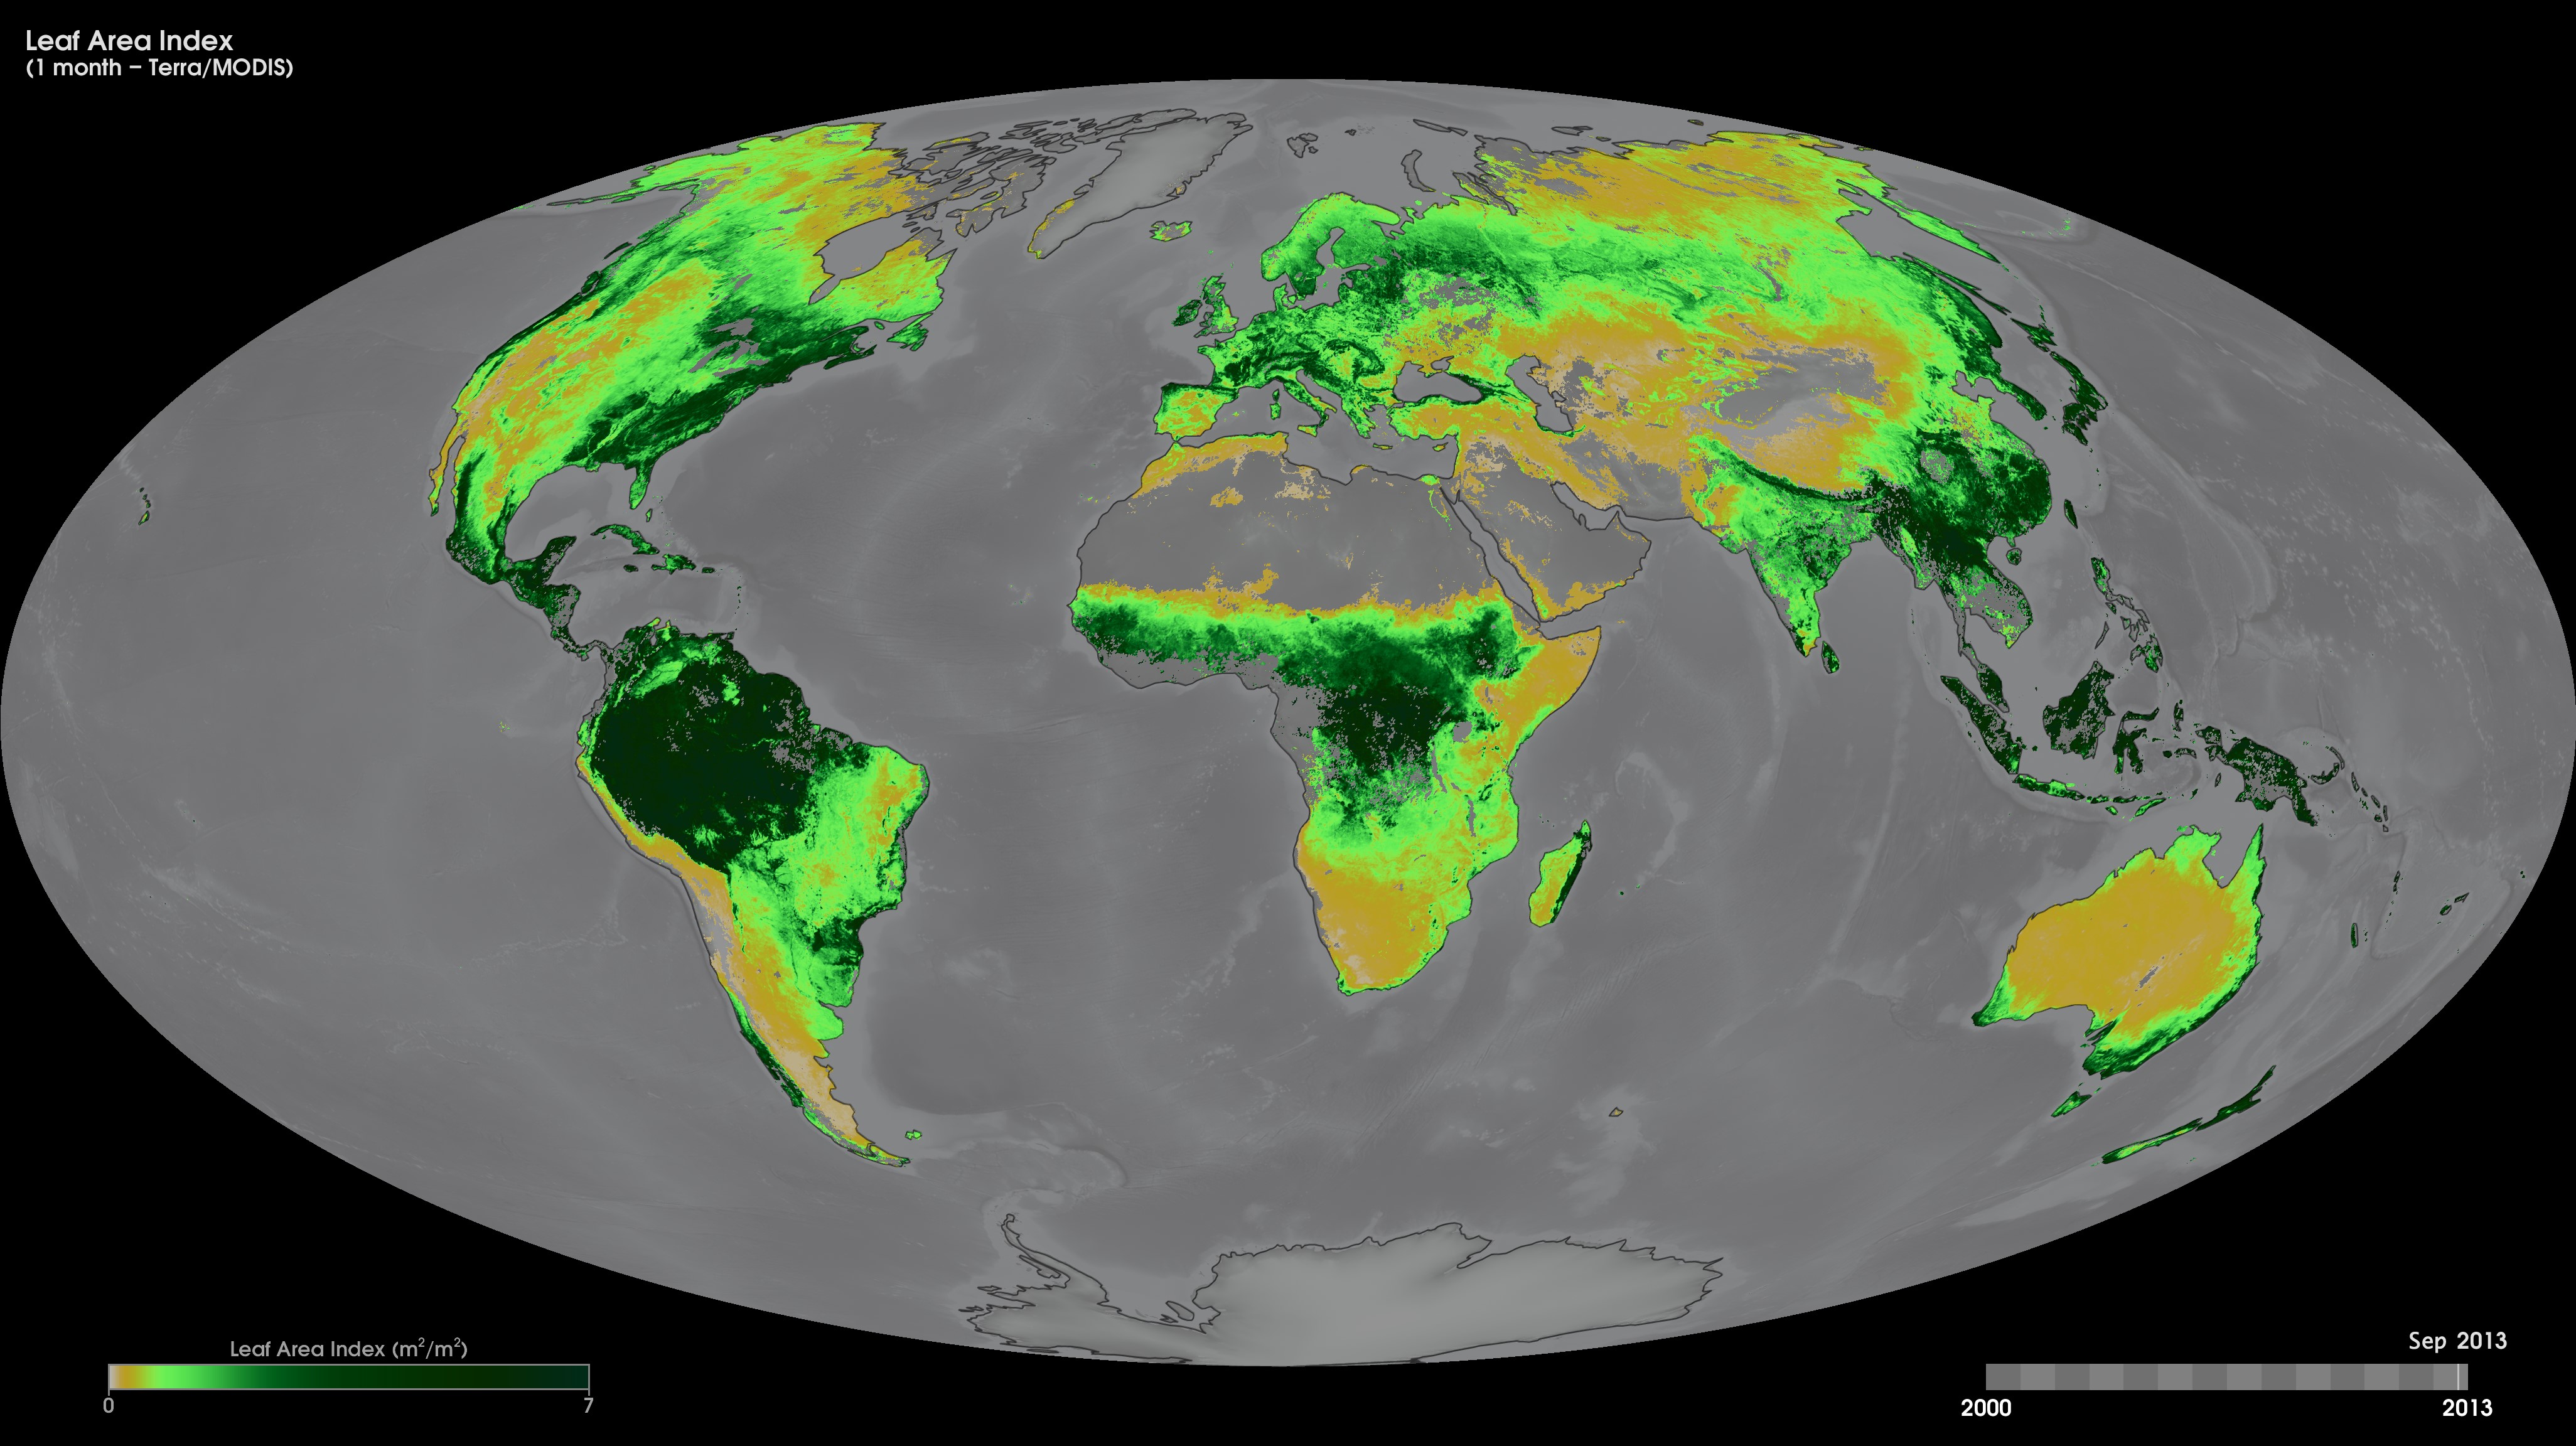 Monthly mean Leaf Area Index (LAI) for September 2013 from MODIS satellite. The animation shows monthly LAI dynamics between February 2000 and September 2013.Credit: NASA/GSFC.